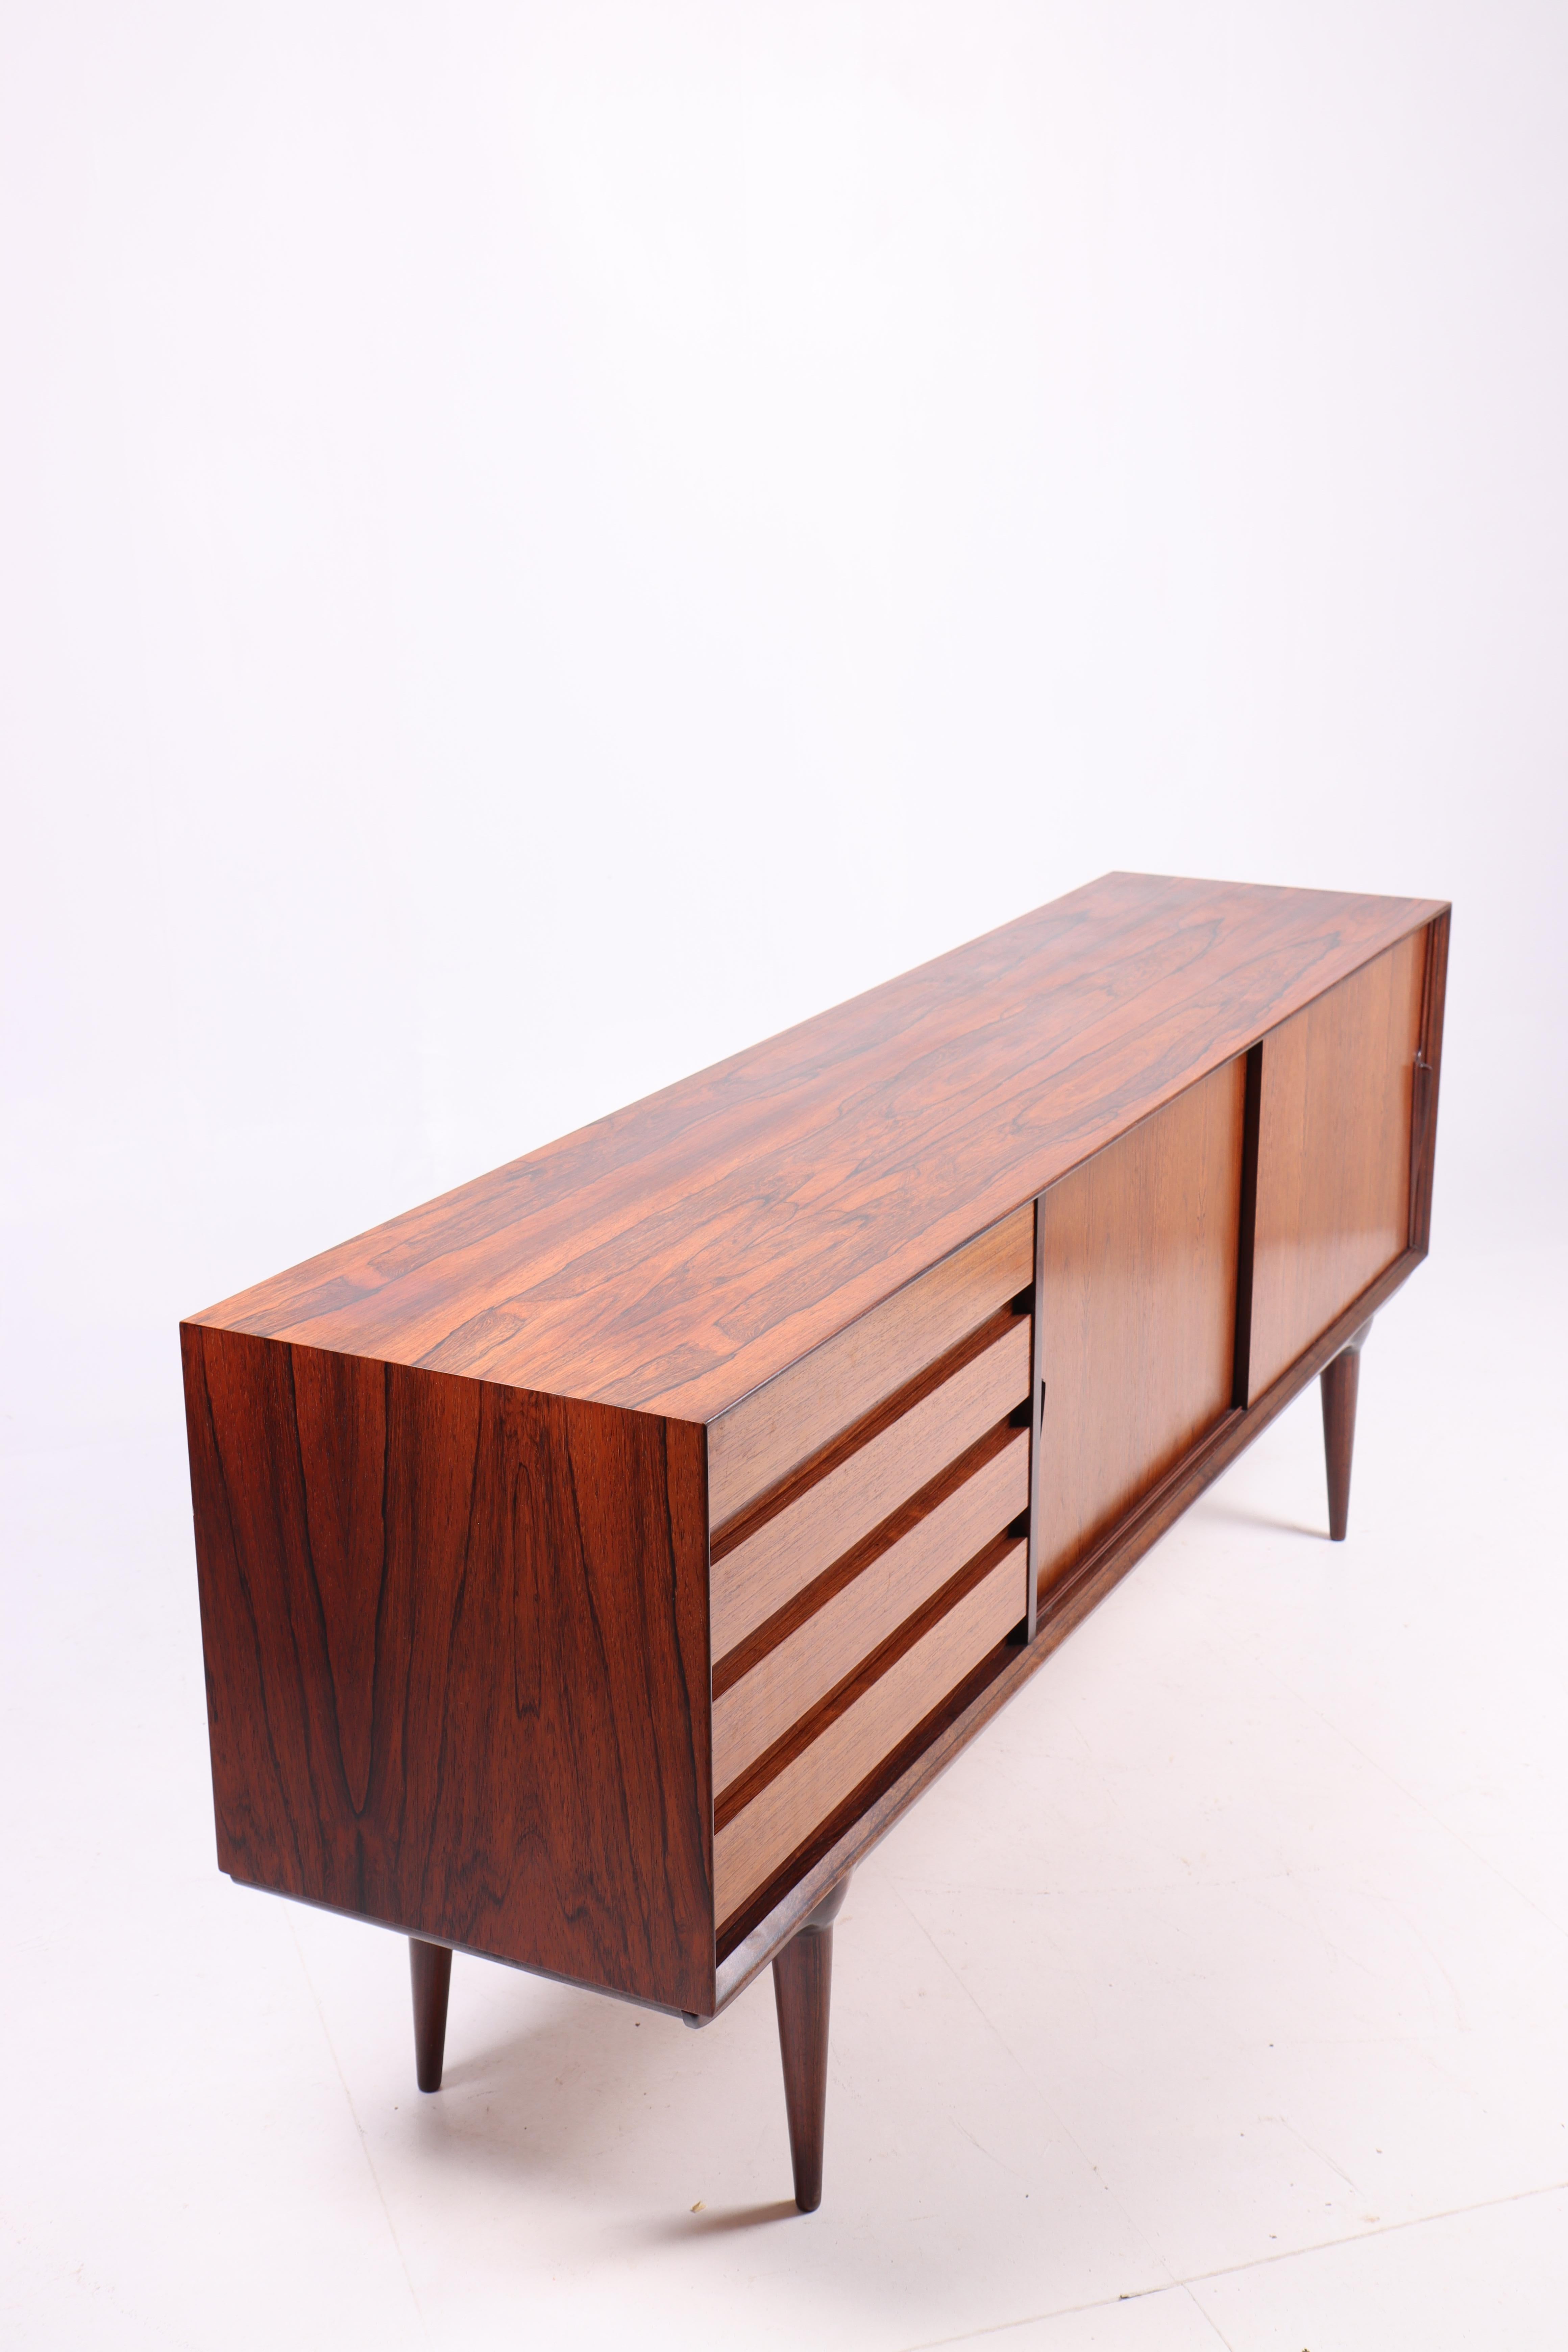 Midcentury Sideboard in Rosewood by Omann Jun, 1950s For Sale 5